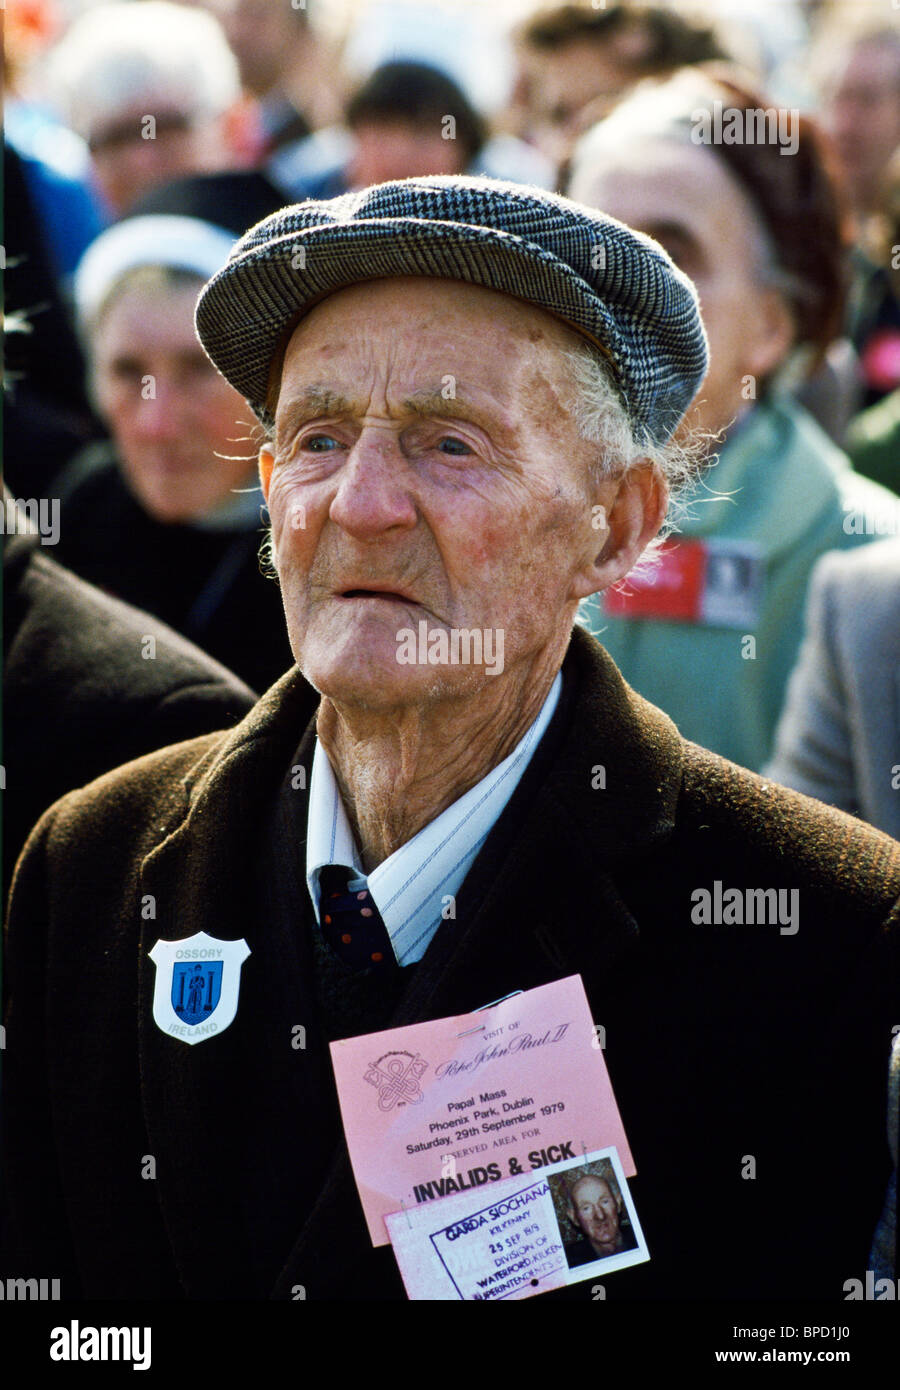 Pilgrim with official identity pass attends mass celebrated by Pope John Paul II in Knock, Ireland Stock Photo